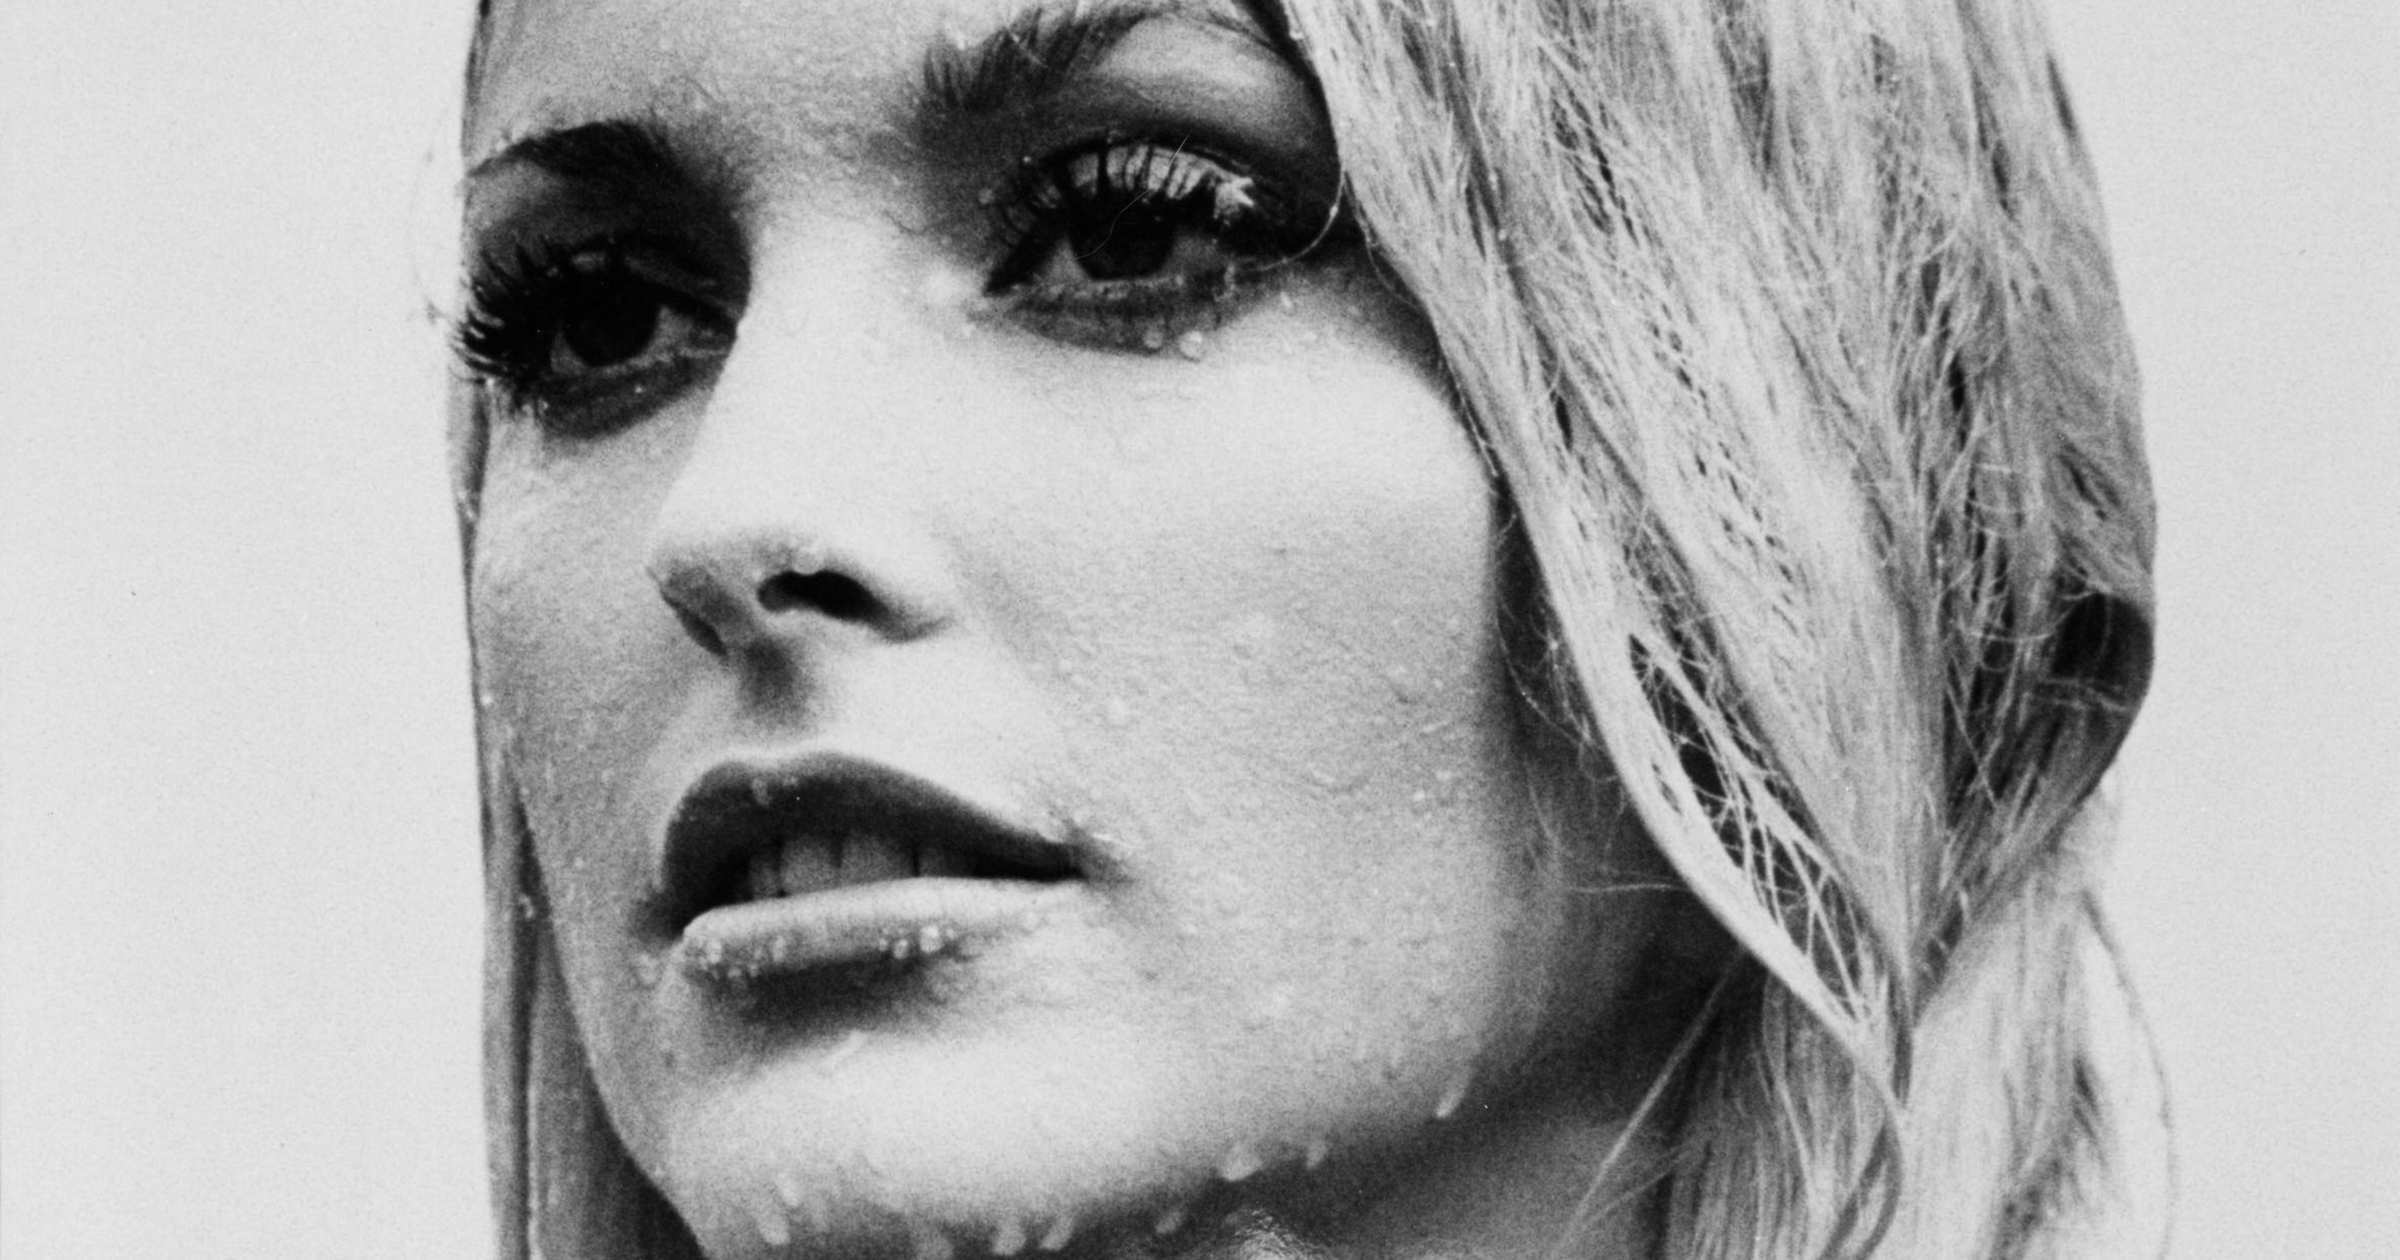 Sharon Tate Wallpaper Image Photo Picture Background